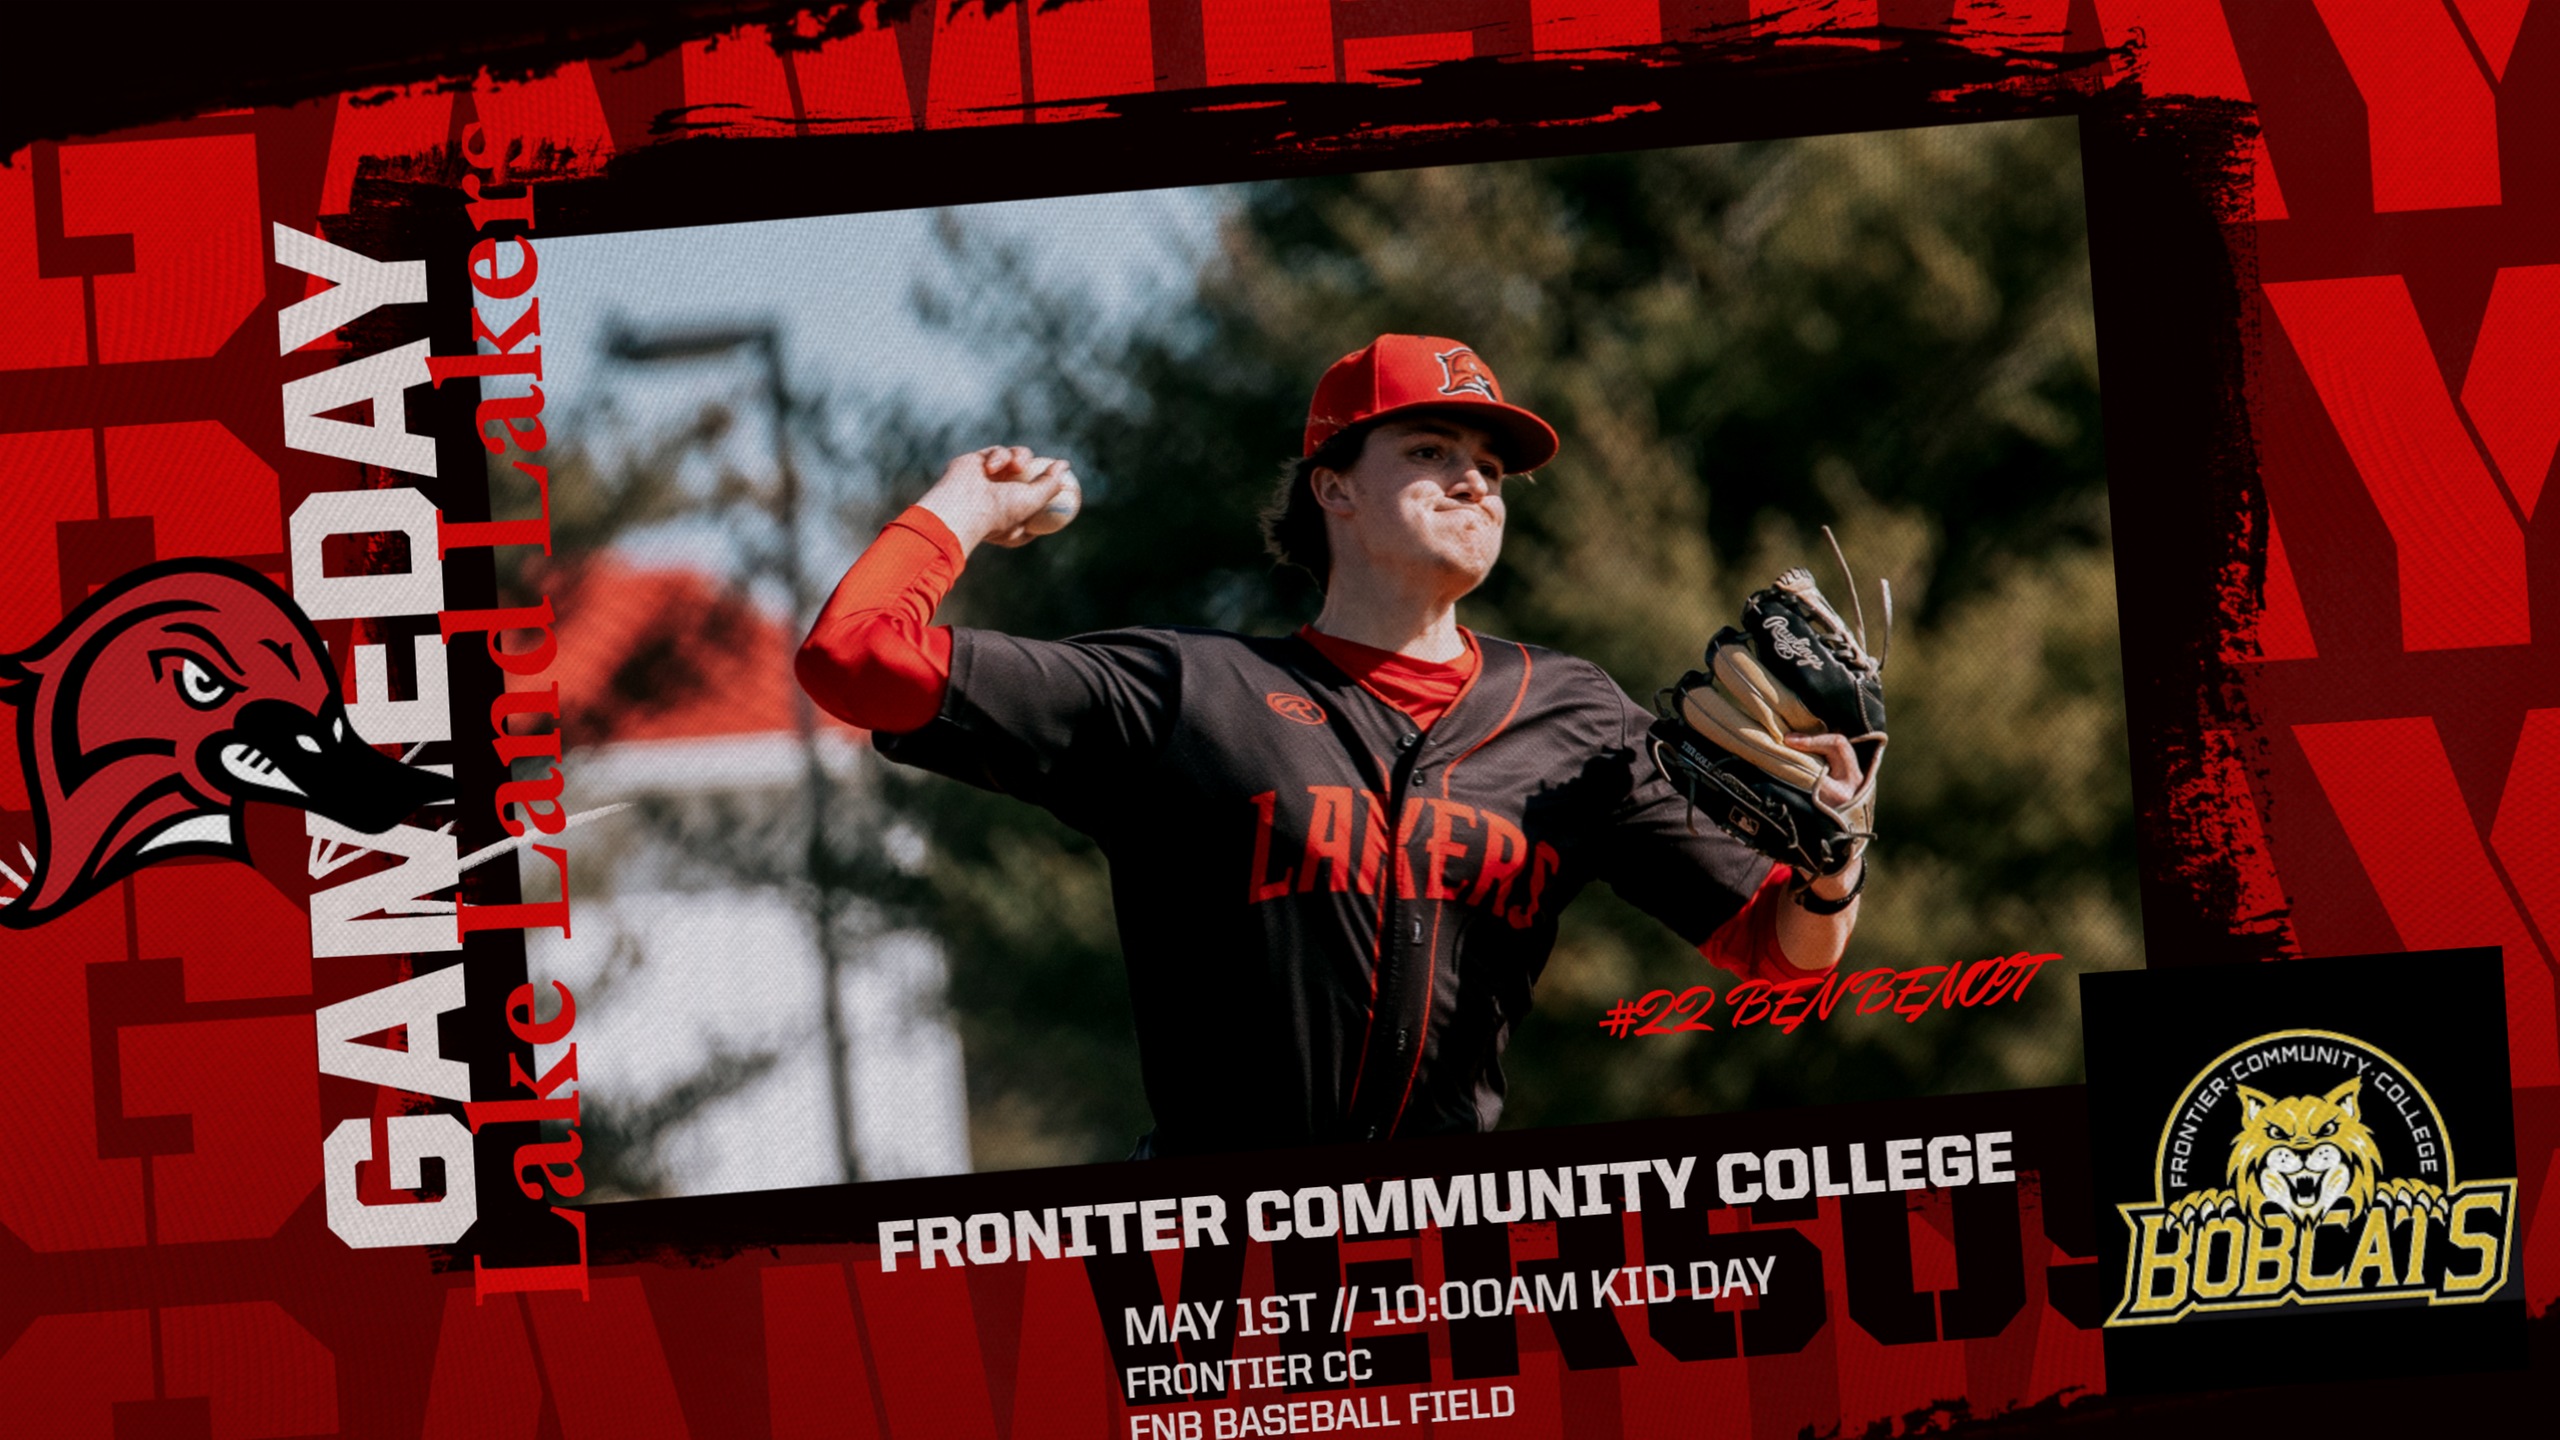 Lakers Travel to Fairfield, IL for Game 1 of the Series with the Bobcats